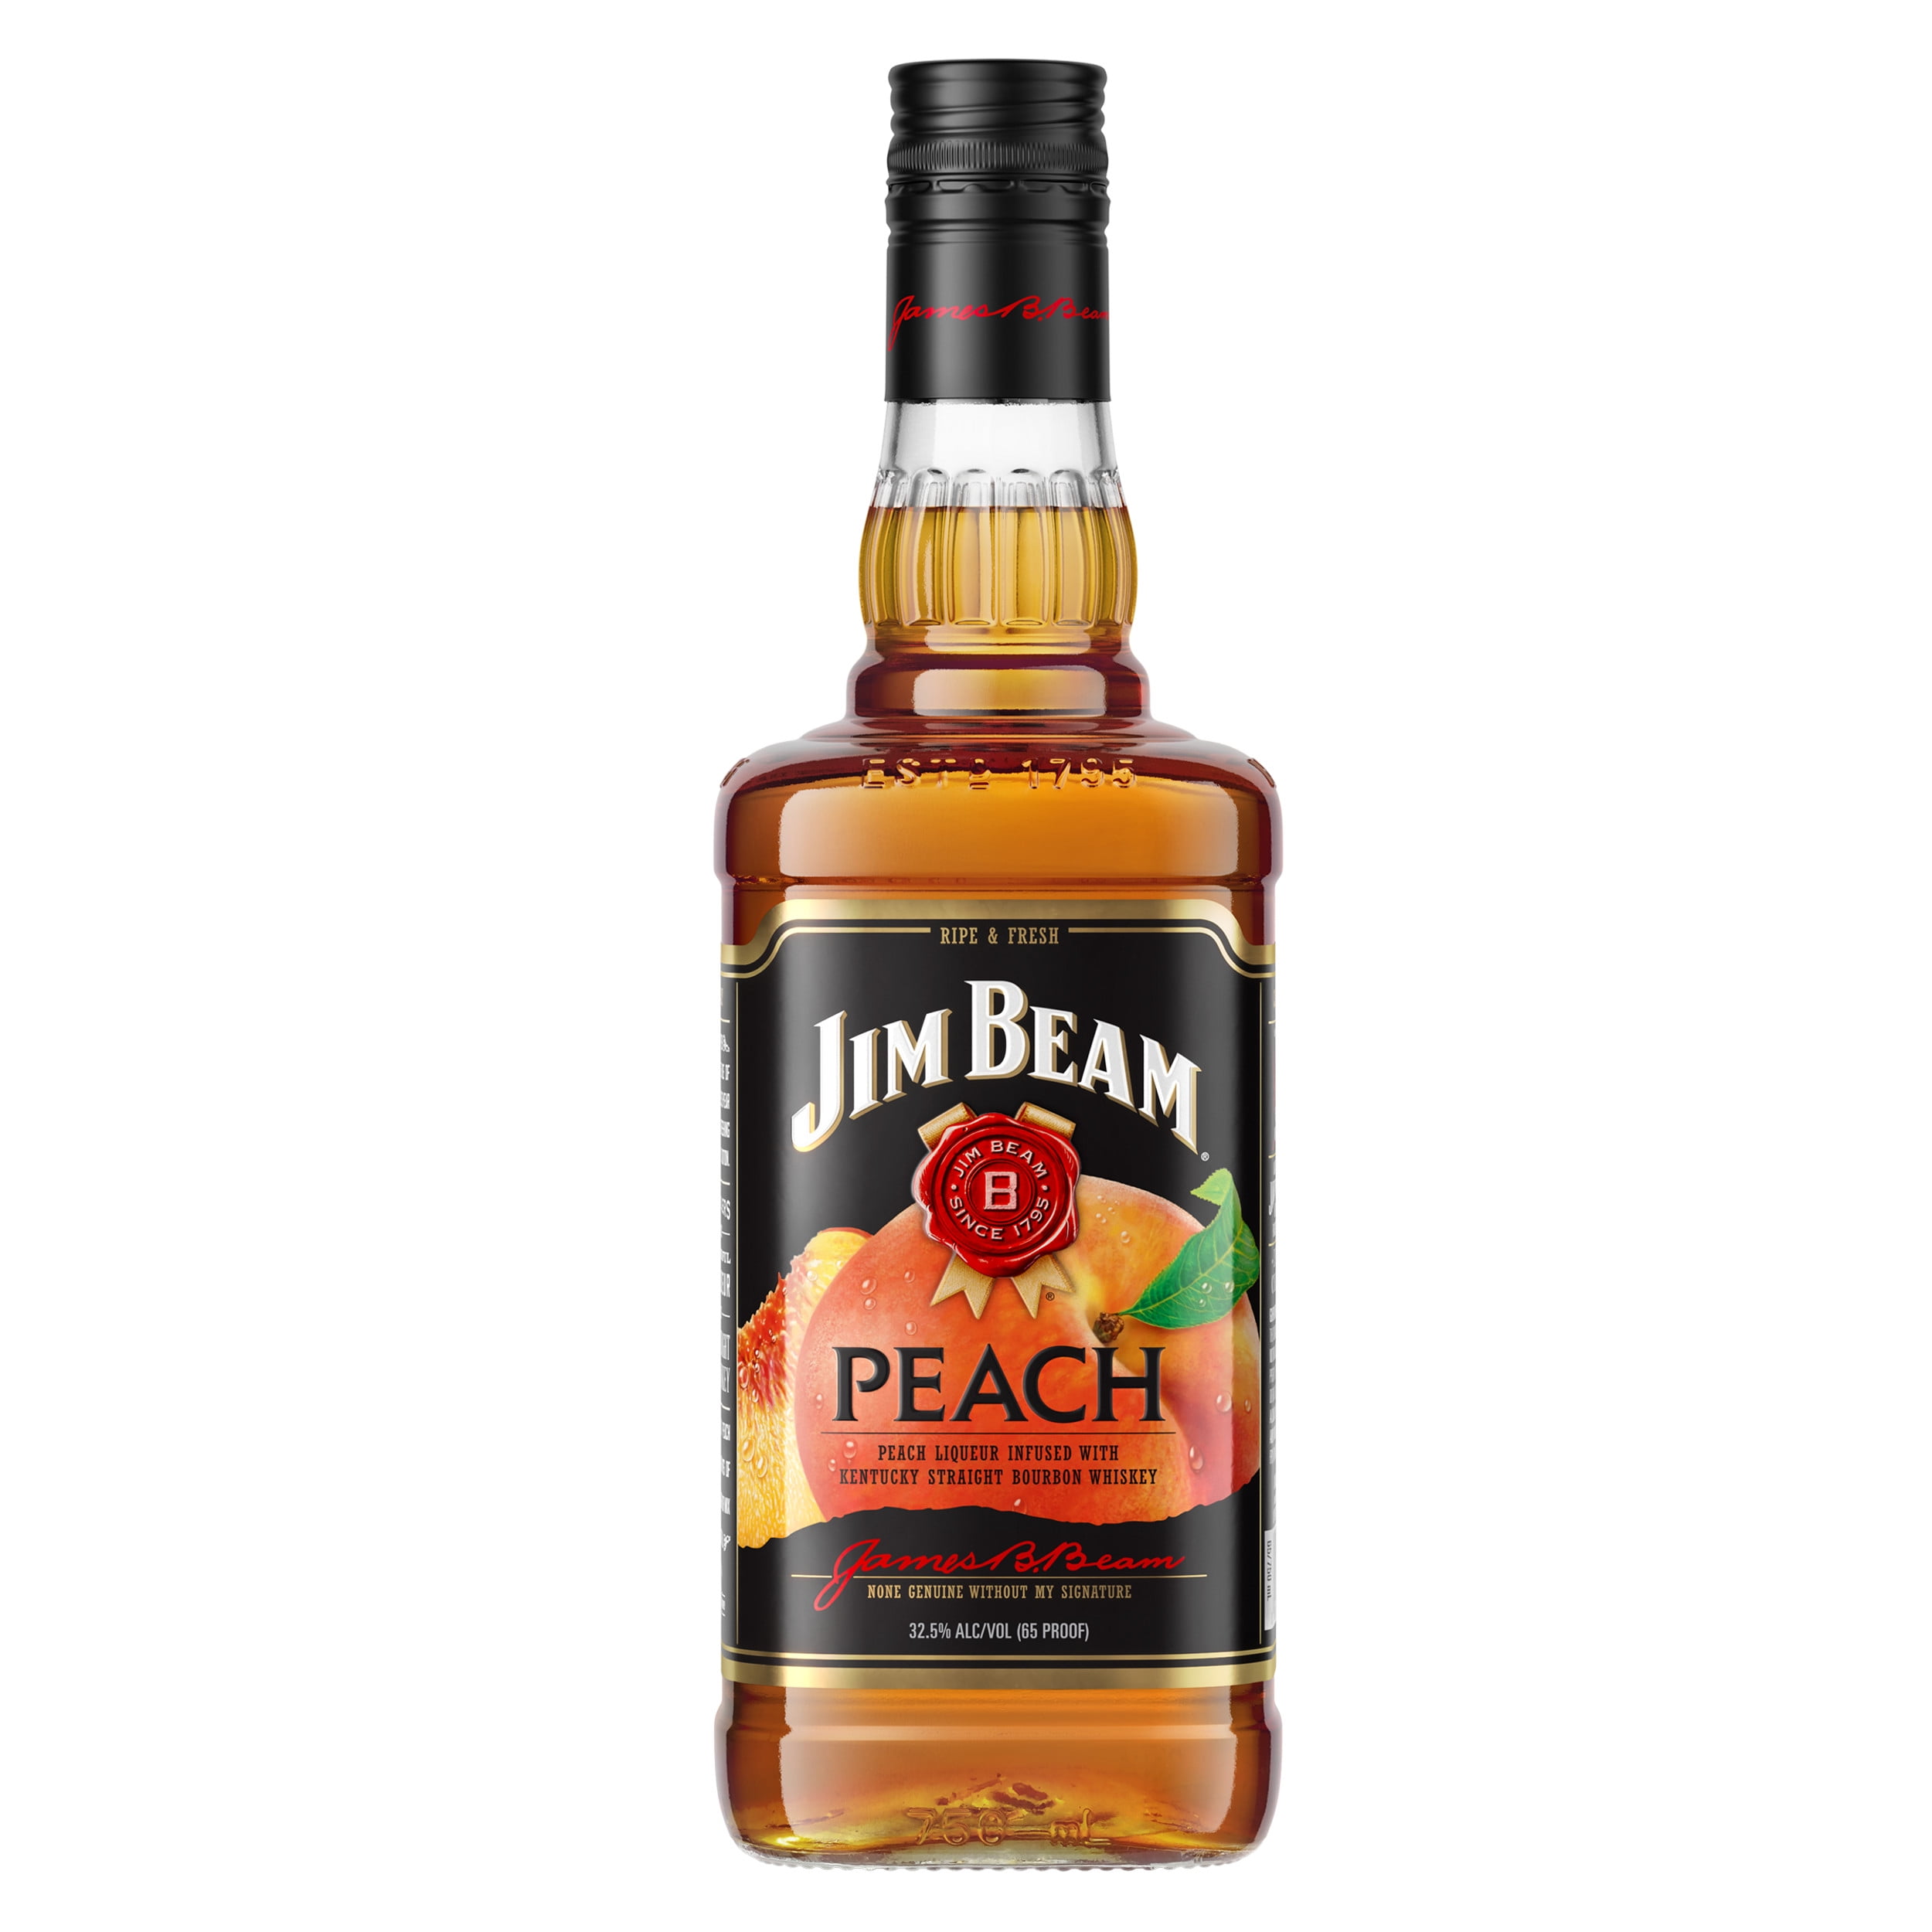 Whiskey, ml Straight Beam 750 ABV Bottle, Peach Jim 32.5% Bourbon Flavored Infused